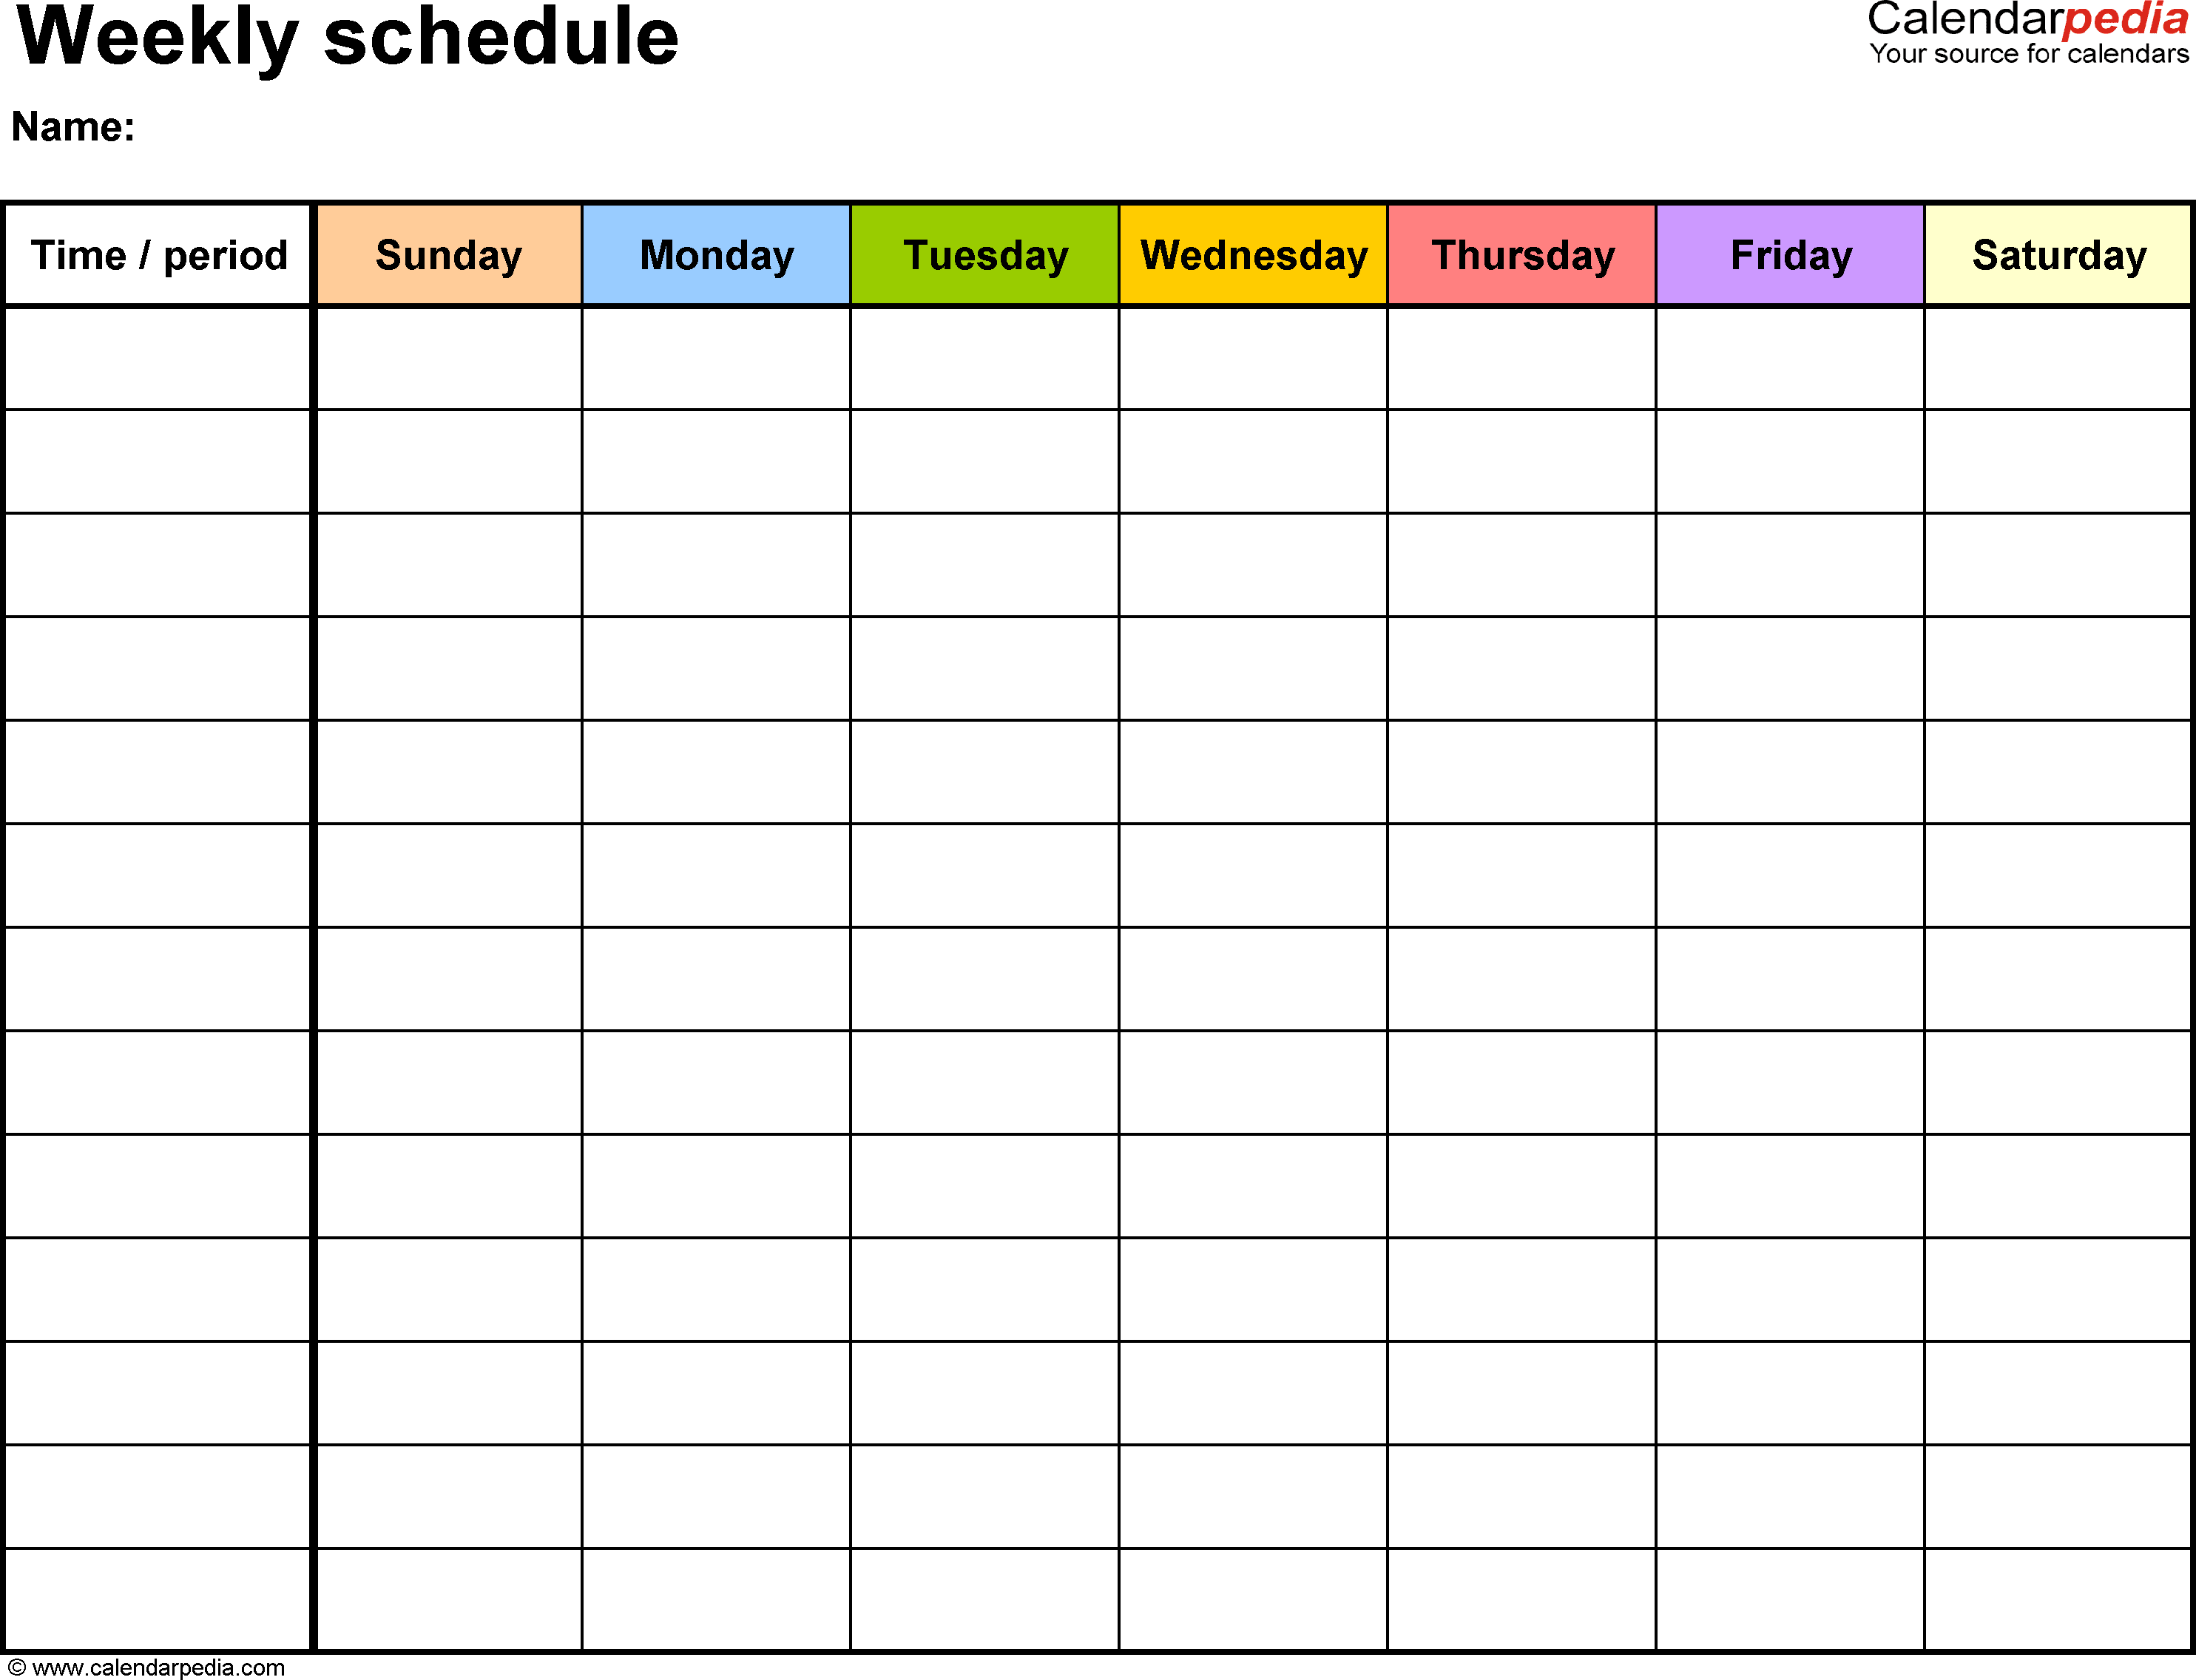 A Weekly Schedule Template